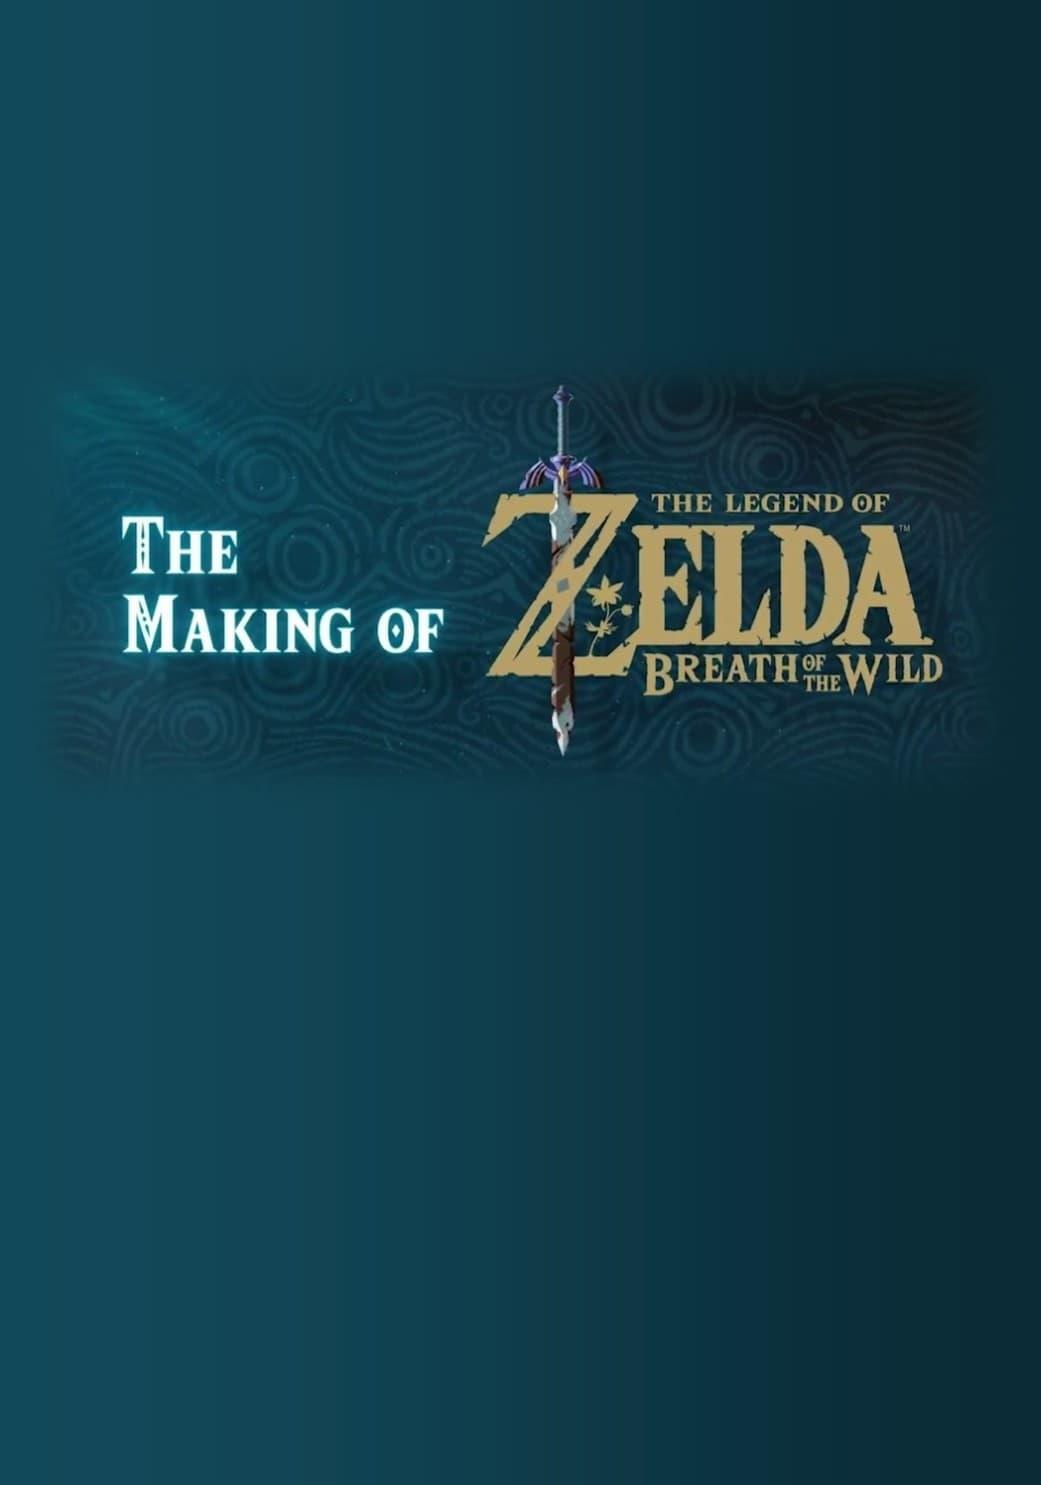 The Making of The Legend of Zelda: Breath of the Wild poster